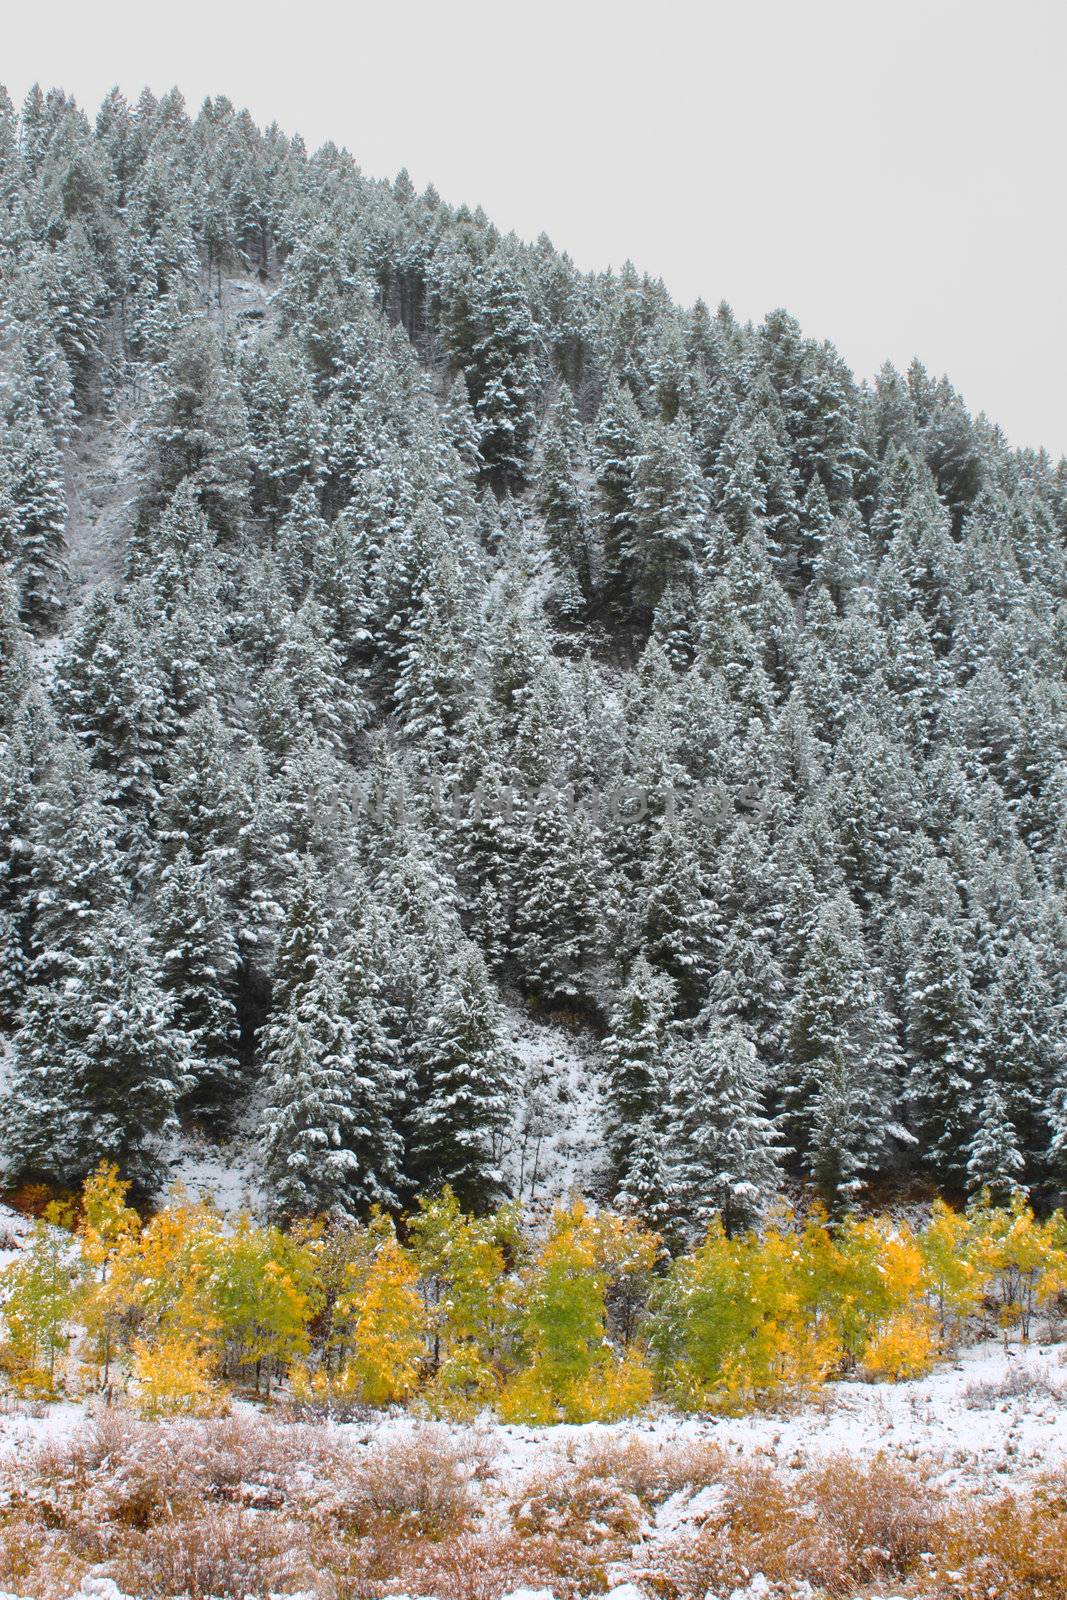 Yellows autumn colors below a snow covered pine forest in Wyoming.